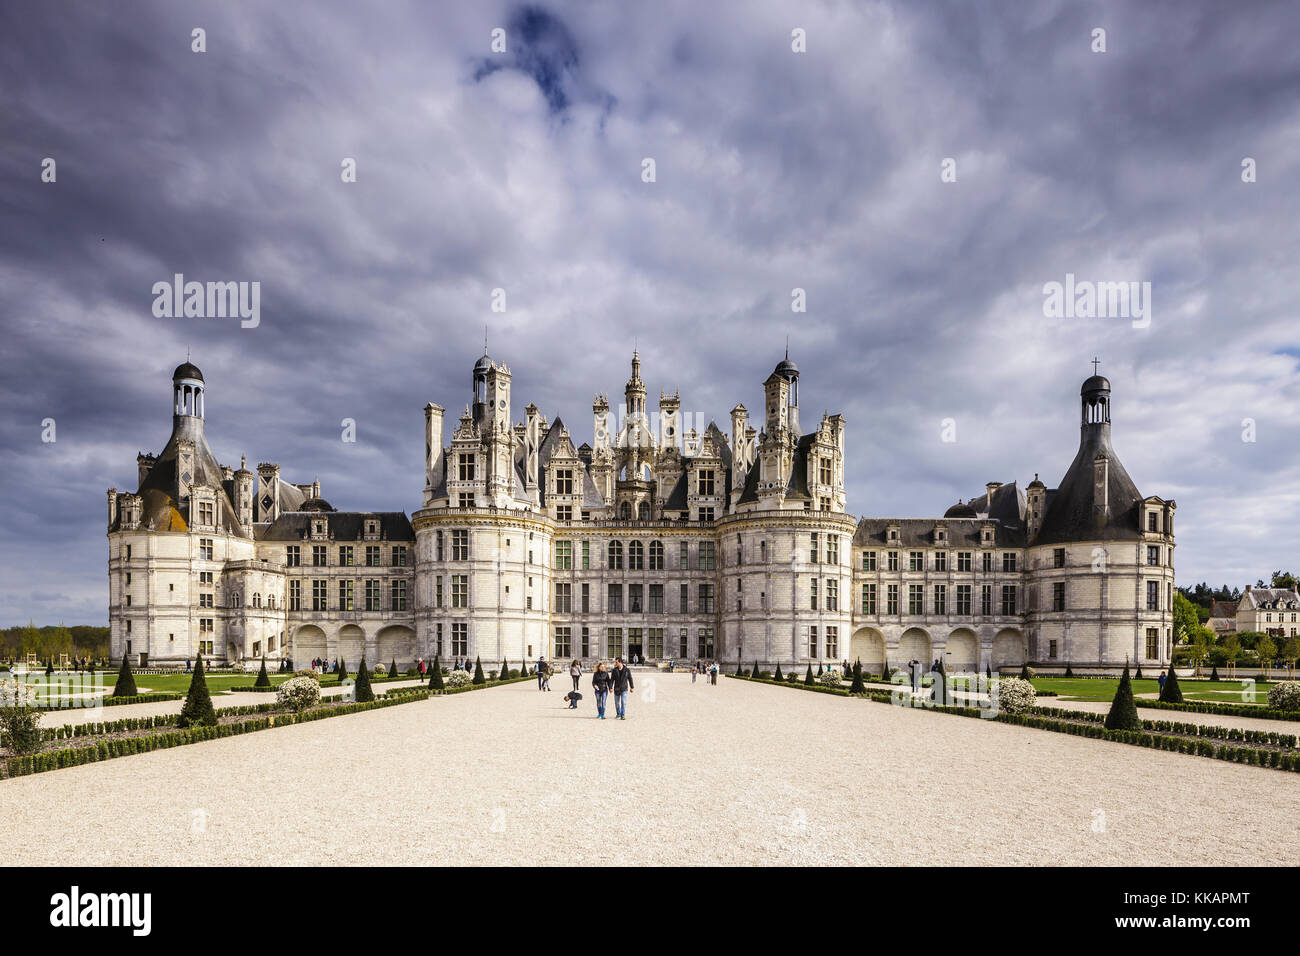 The chateau of Chambord, one of the most recognizable castles in the World, UNESCO, Loire Valley, Loir et Cher, Centre, France, Europe Stock Photo